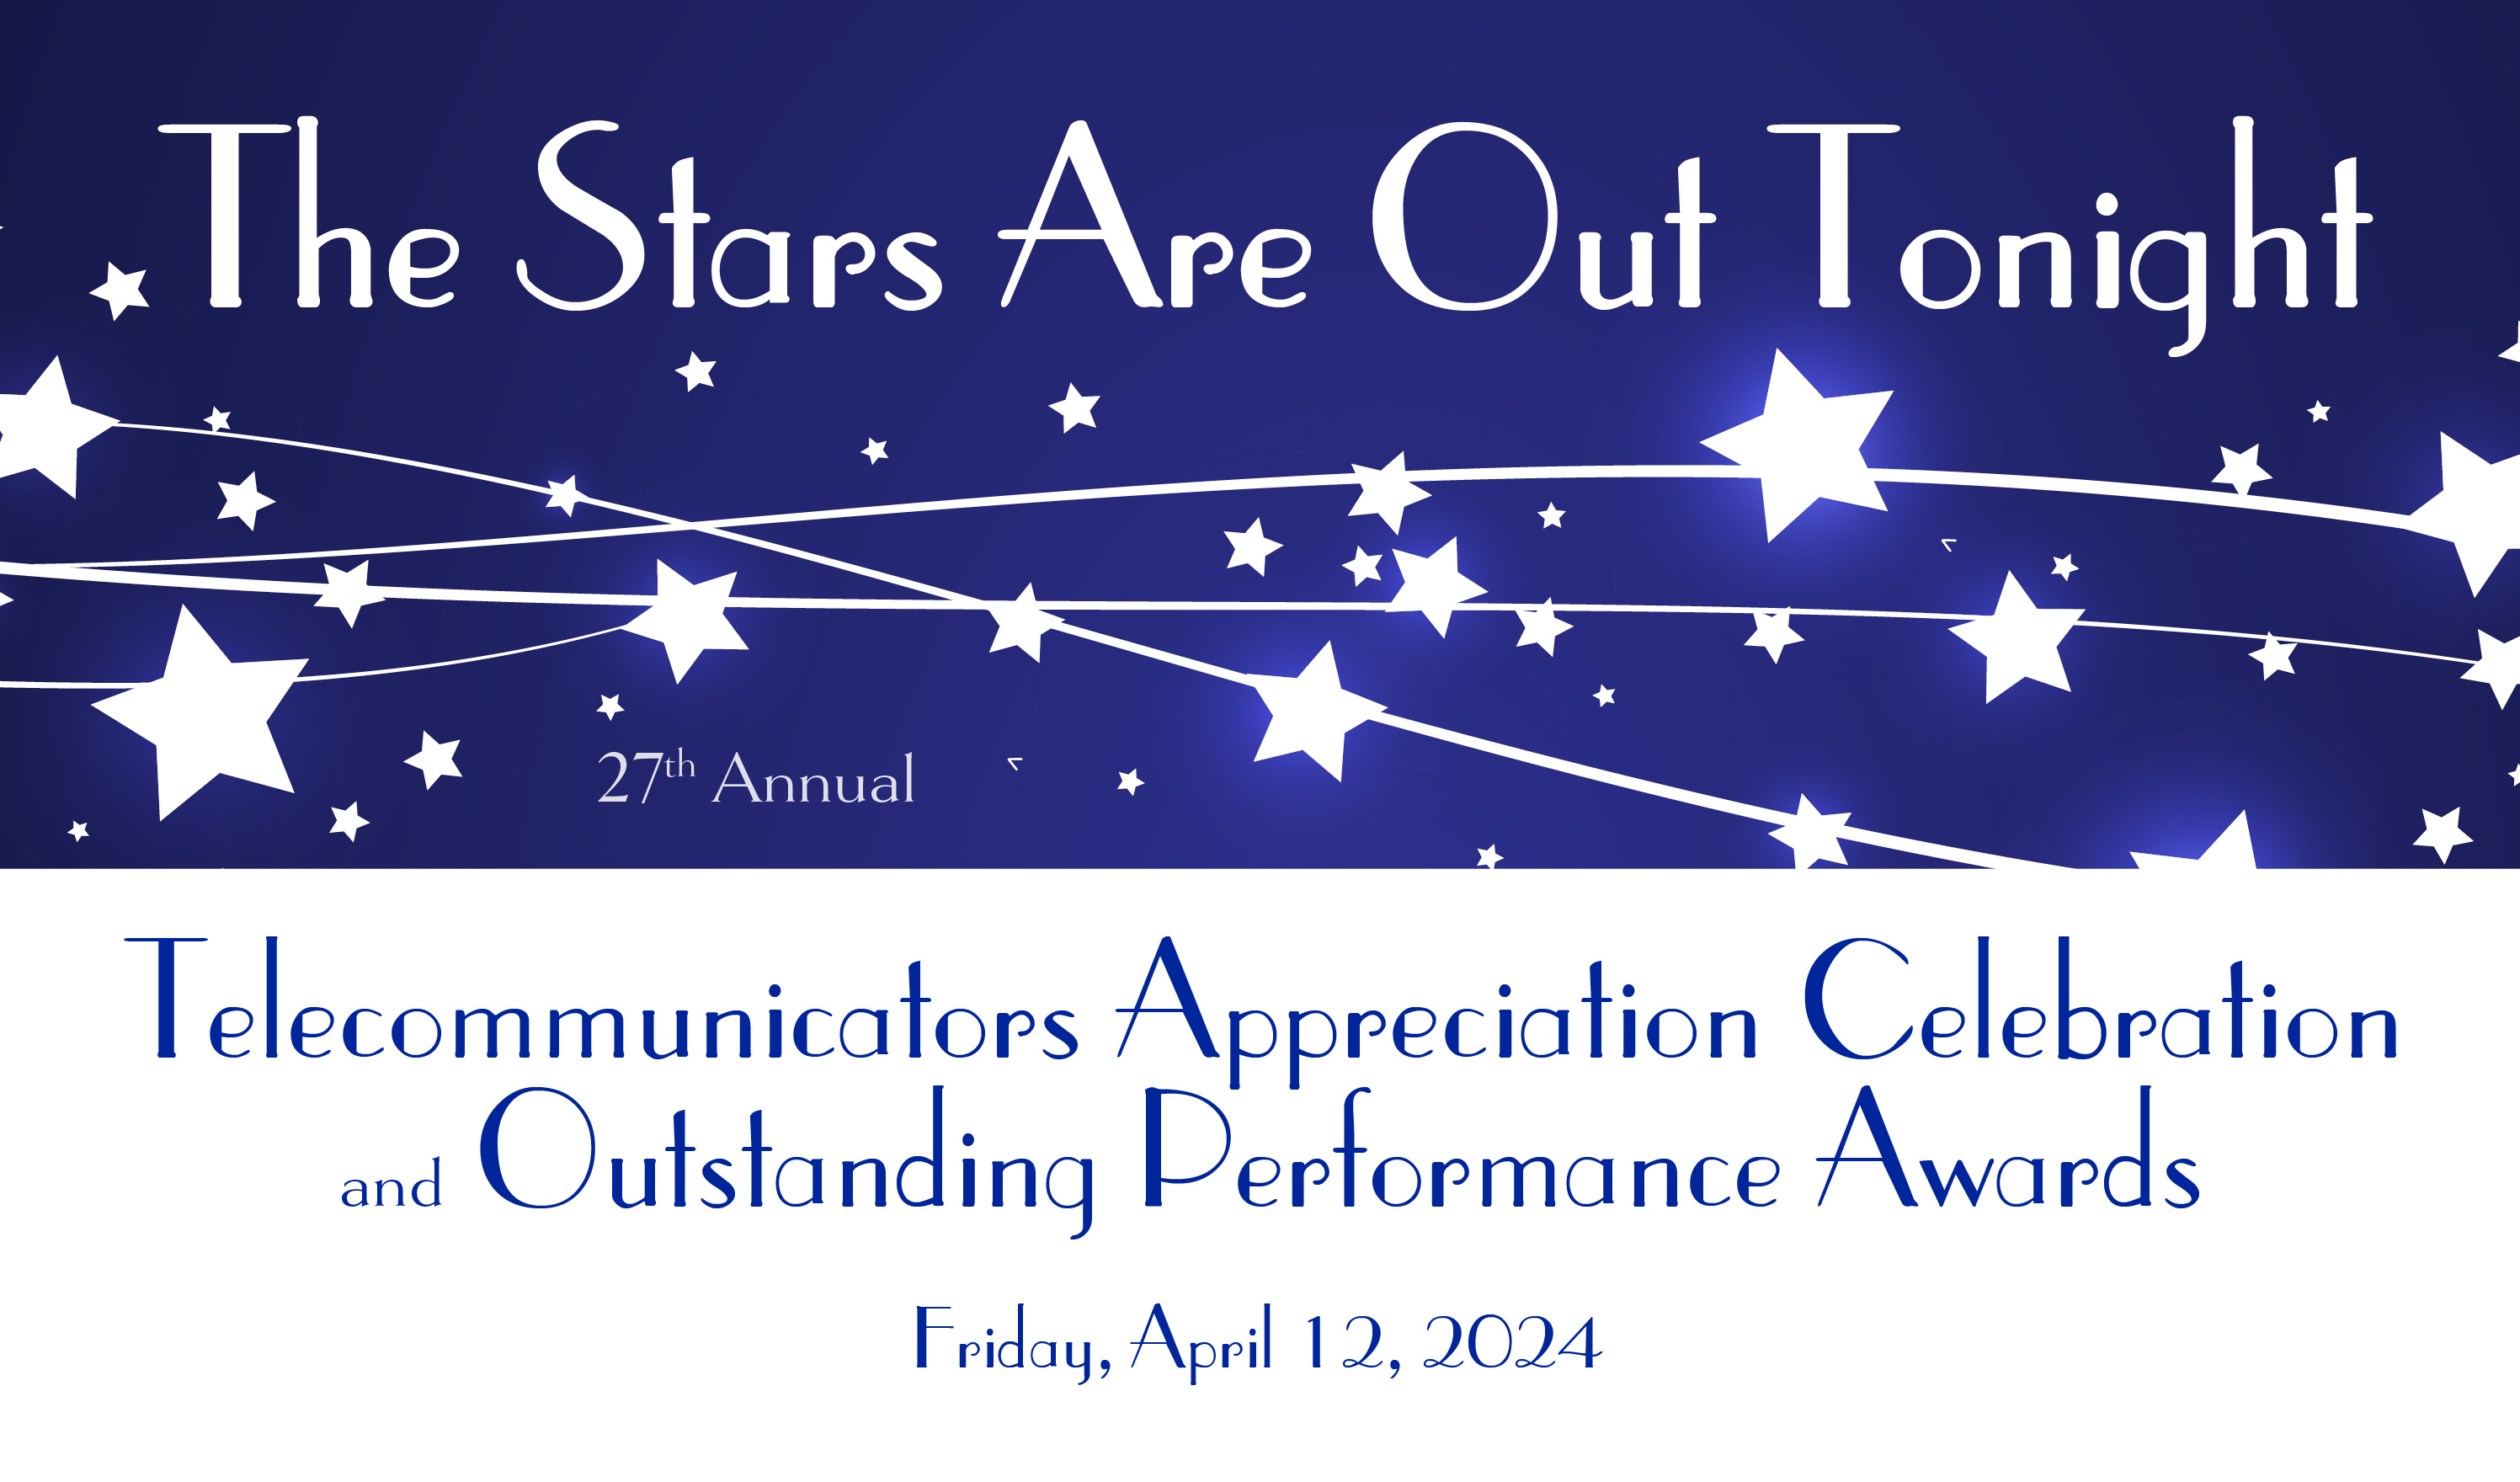 Telecommunicators Appreciation Celebration event logo with the theme The Stars Are Out Tonight